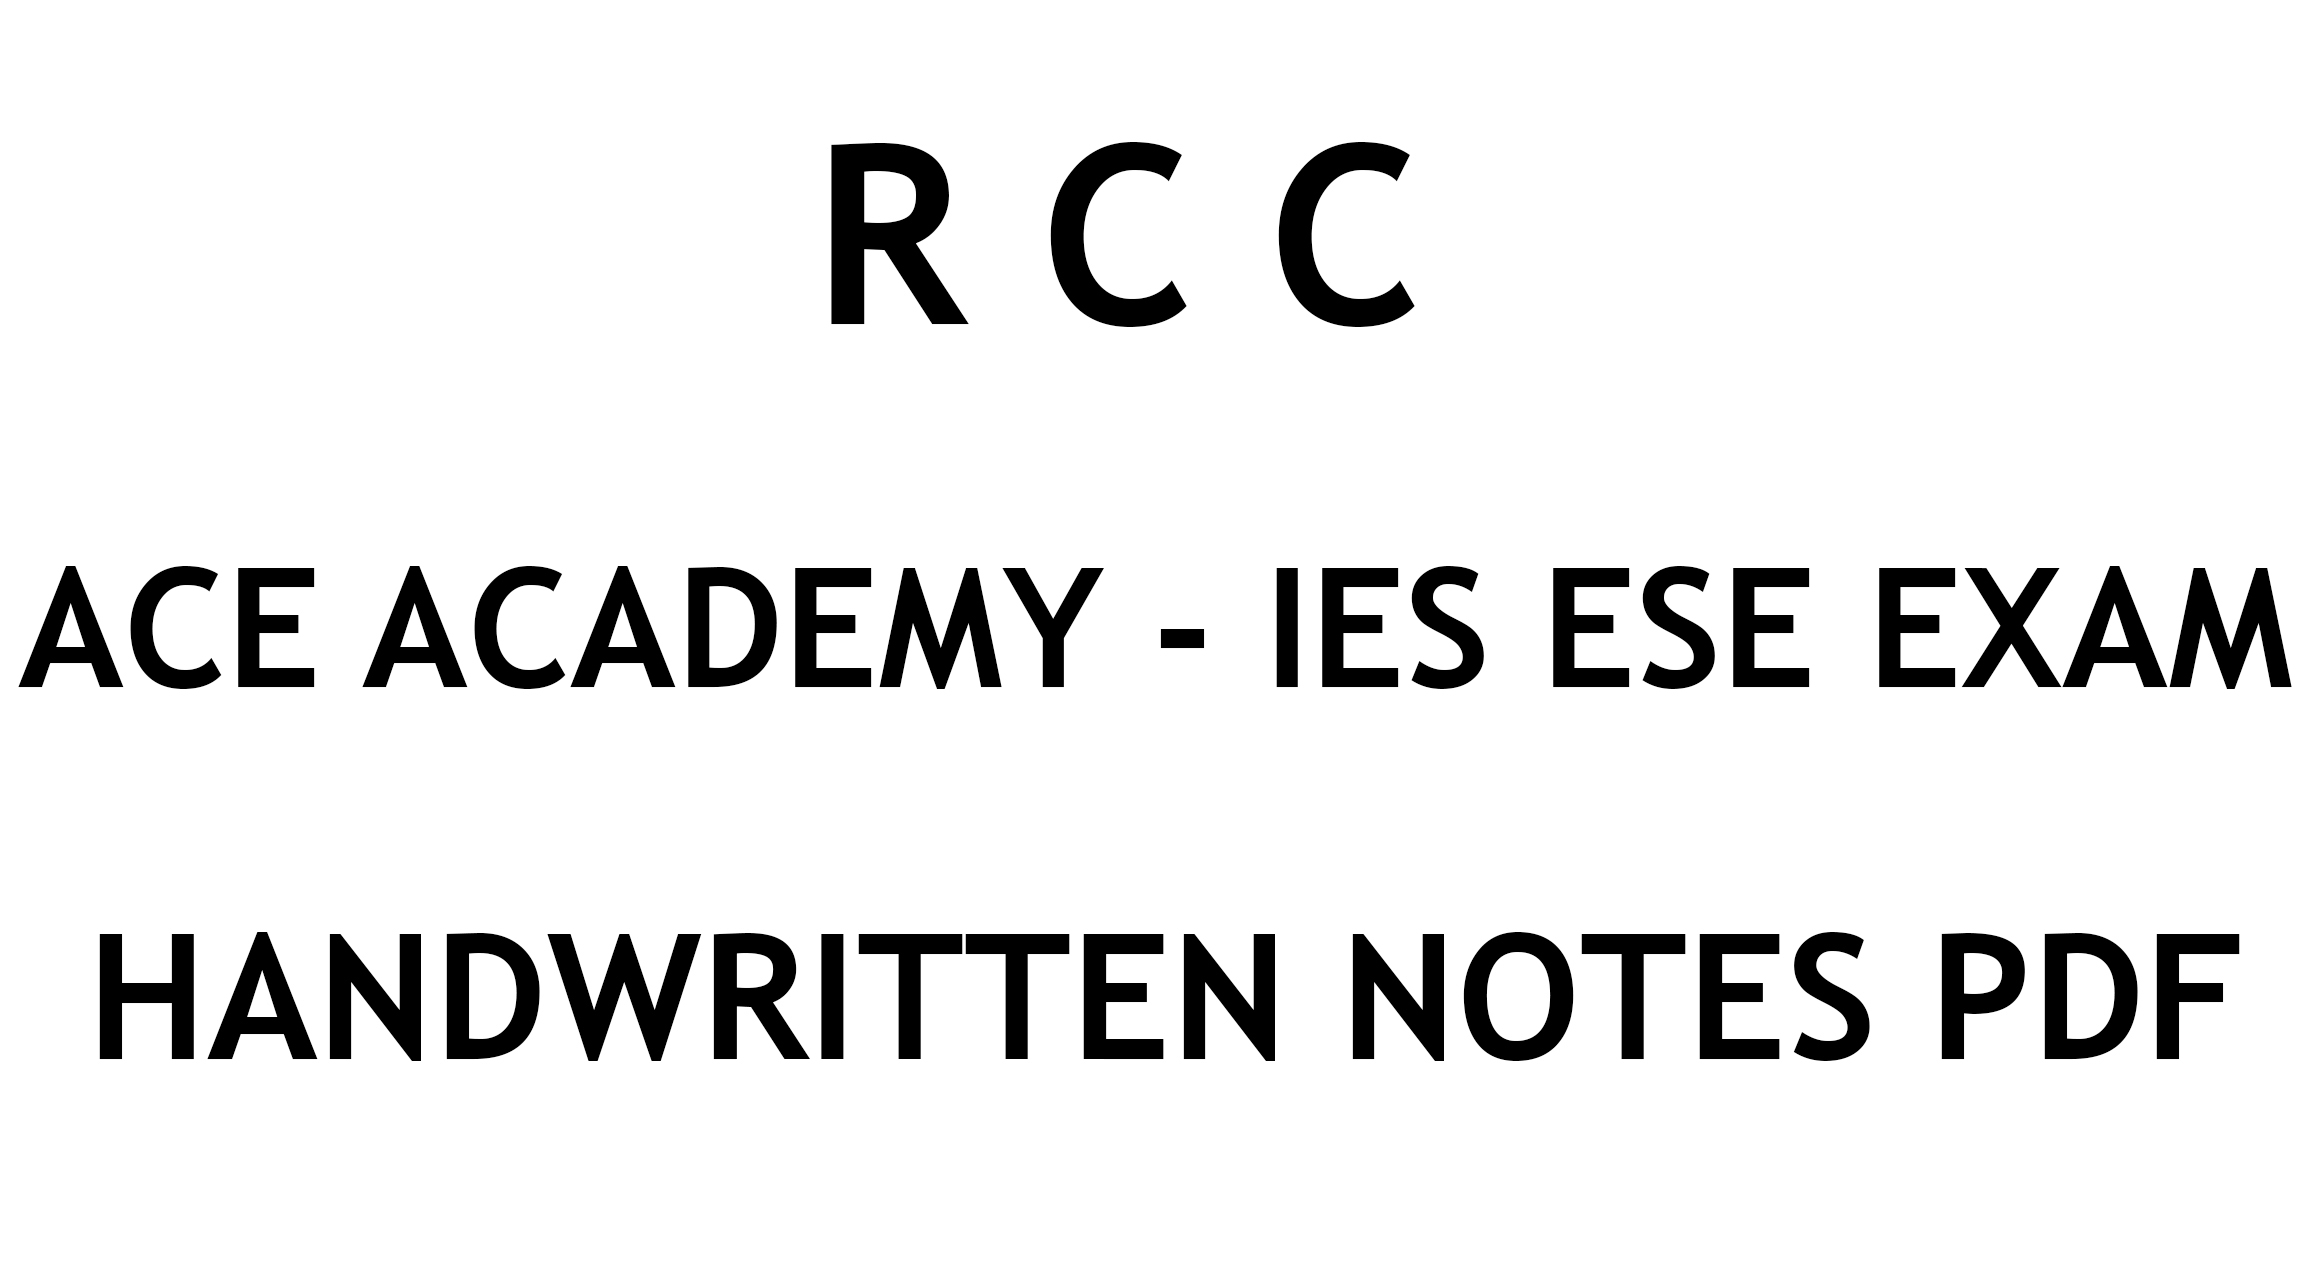 RCC IES ESE Ace Academy Handwritten Notes Free Download PDF